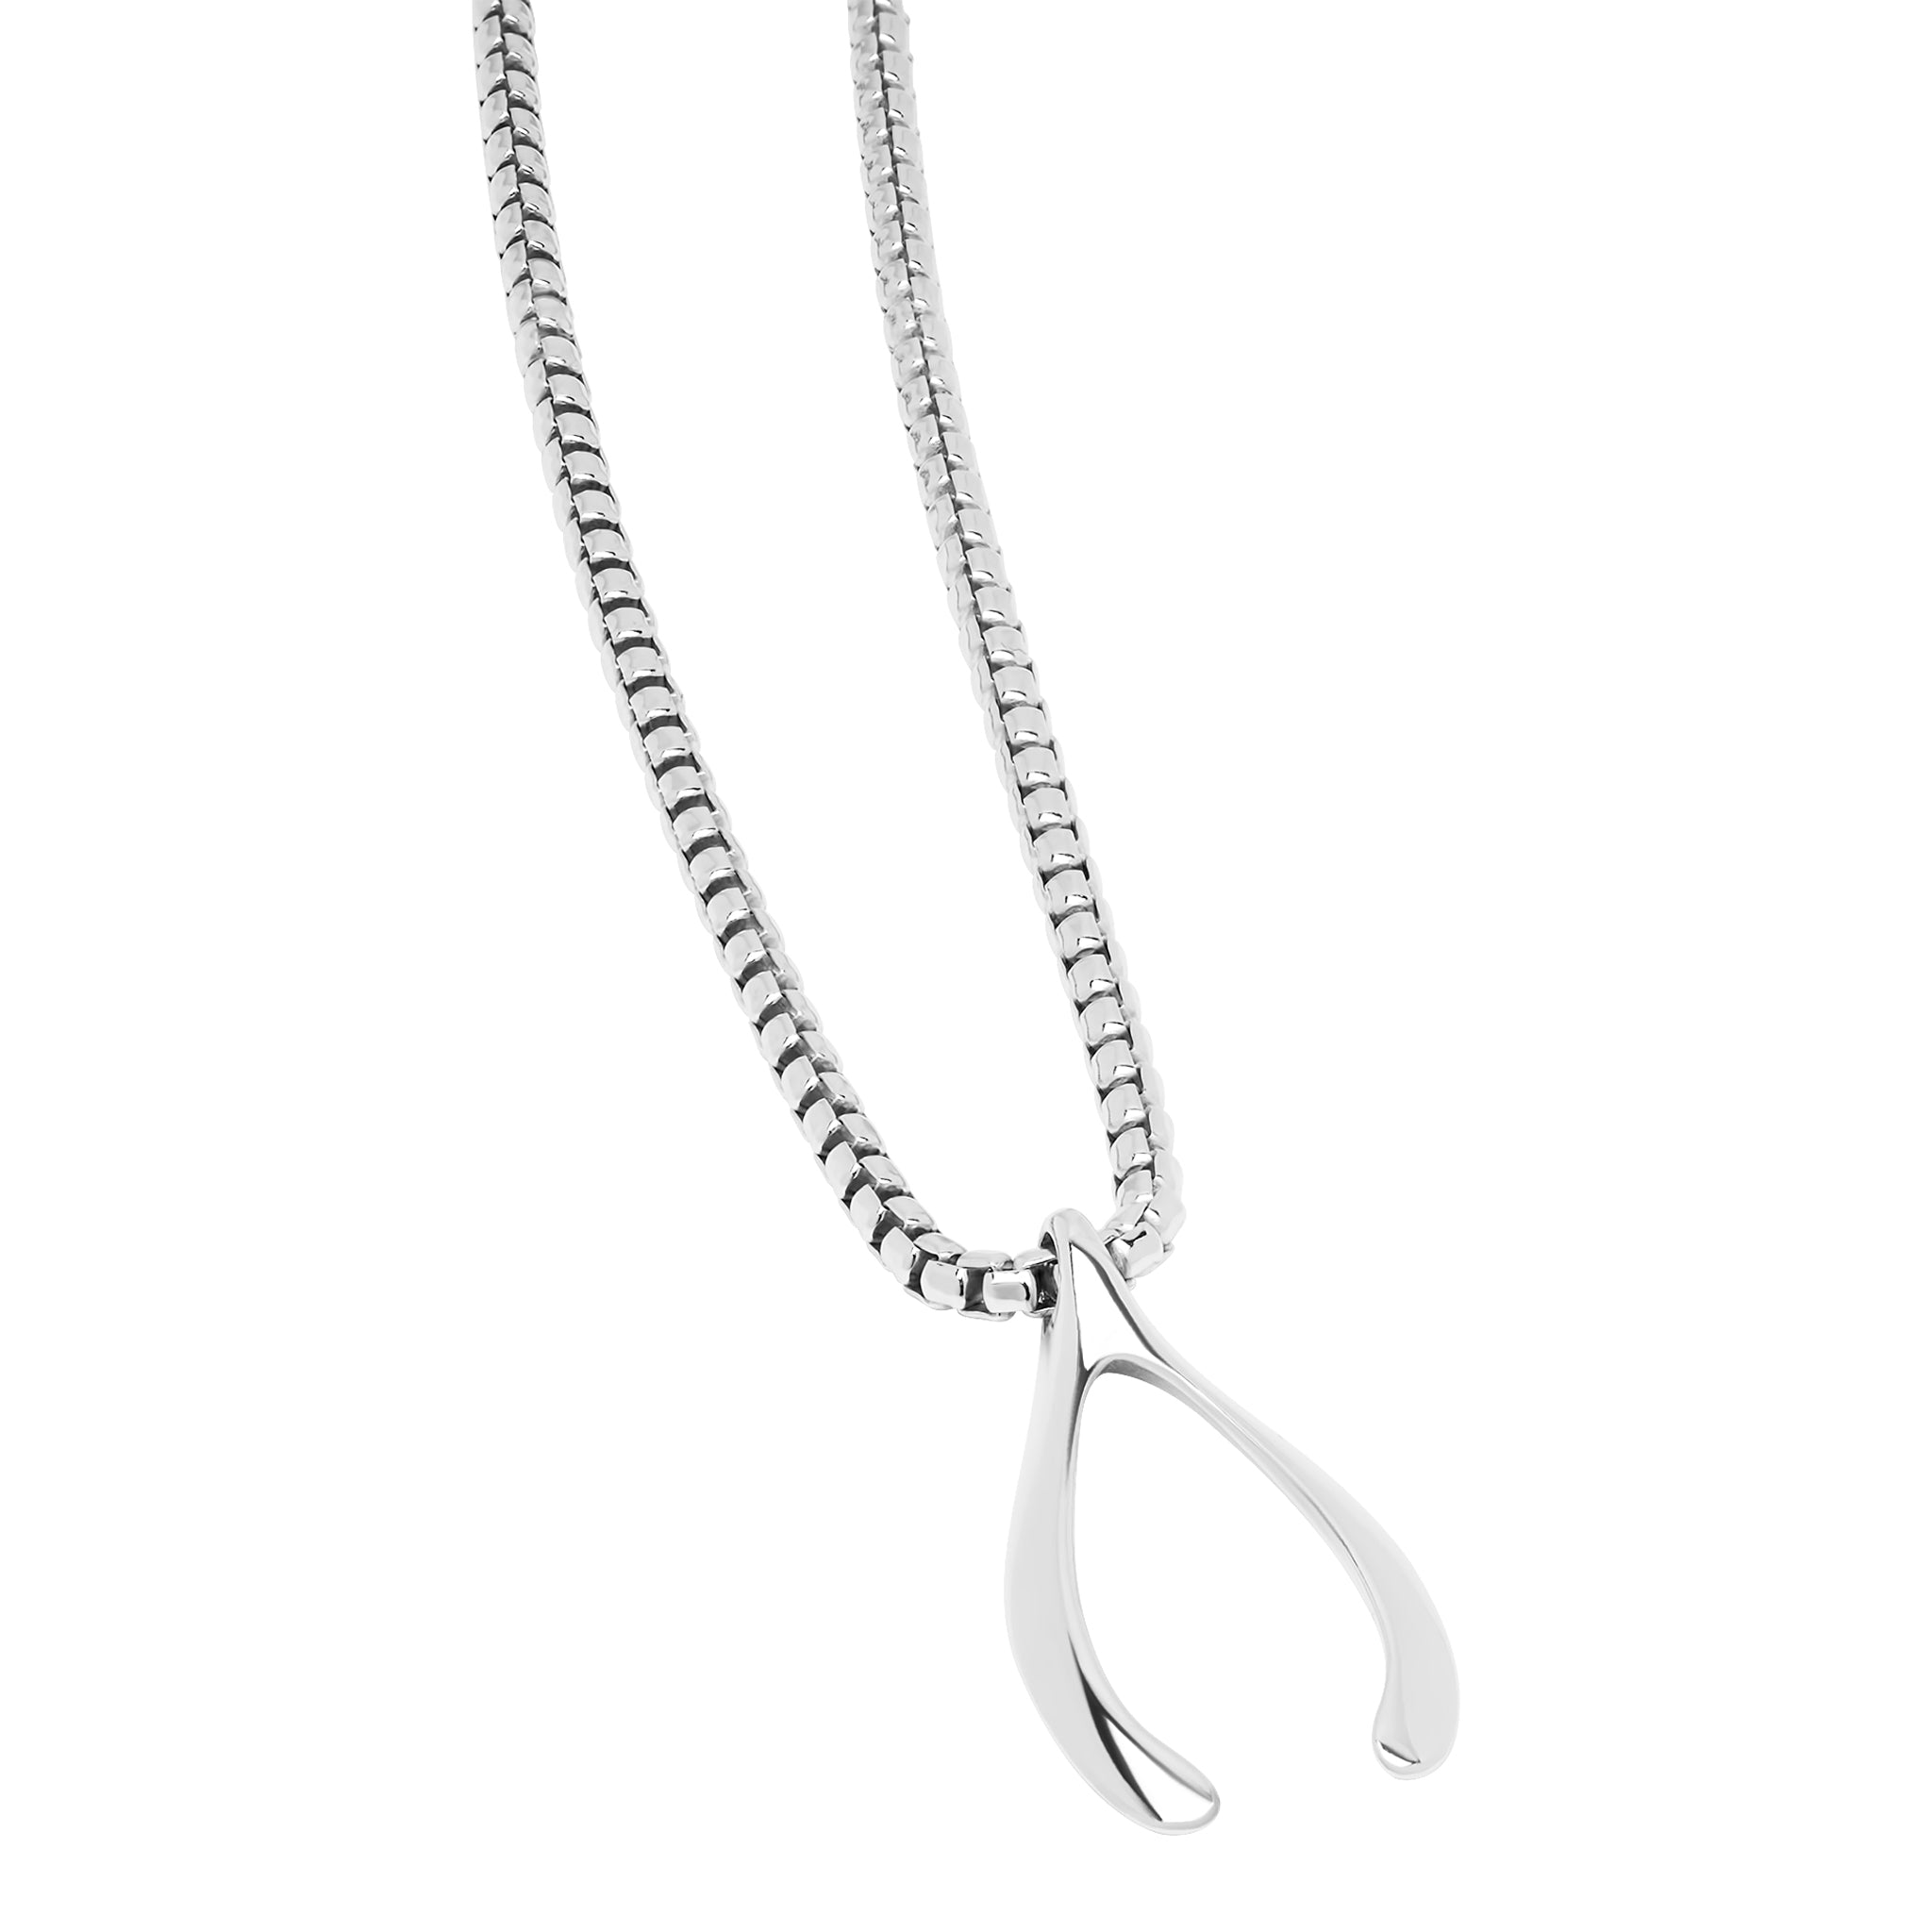 Buy Elegant Sterling Silver Wishbone Necklace // Lucky Sterling Silver  Wishbone // 925 Sterling Silver Wishbone Pendant Necklace // Online in  India - Etsy